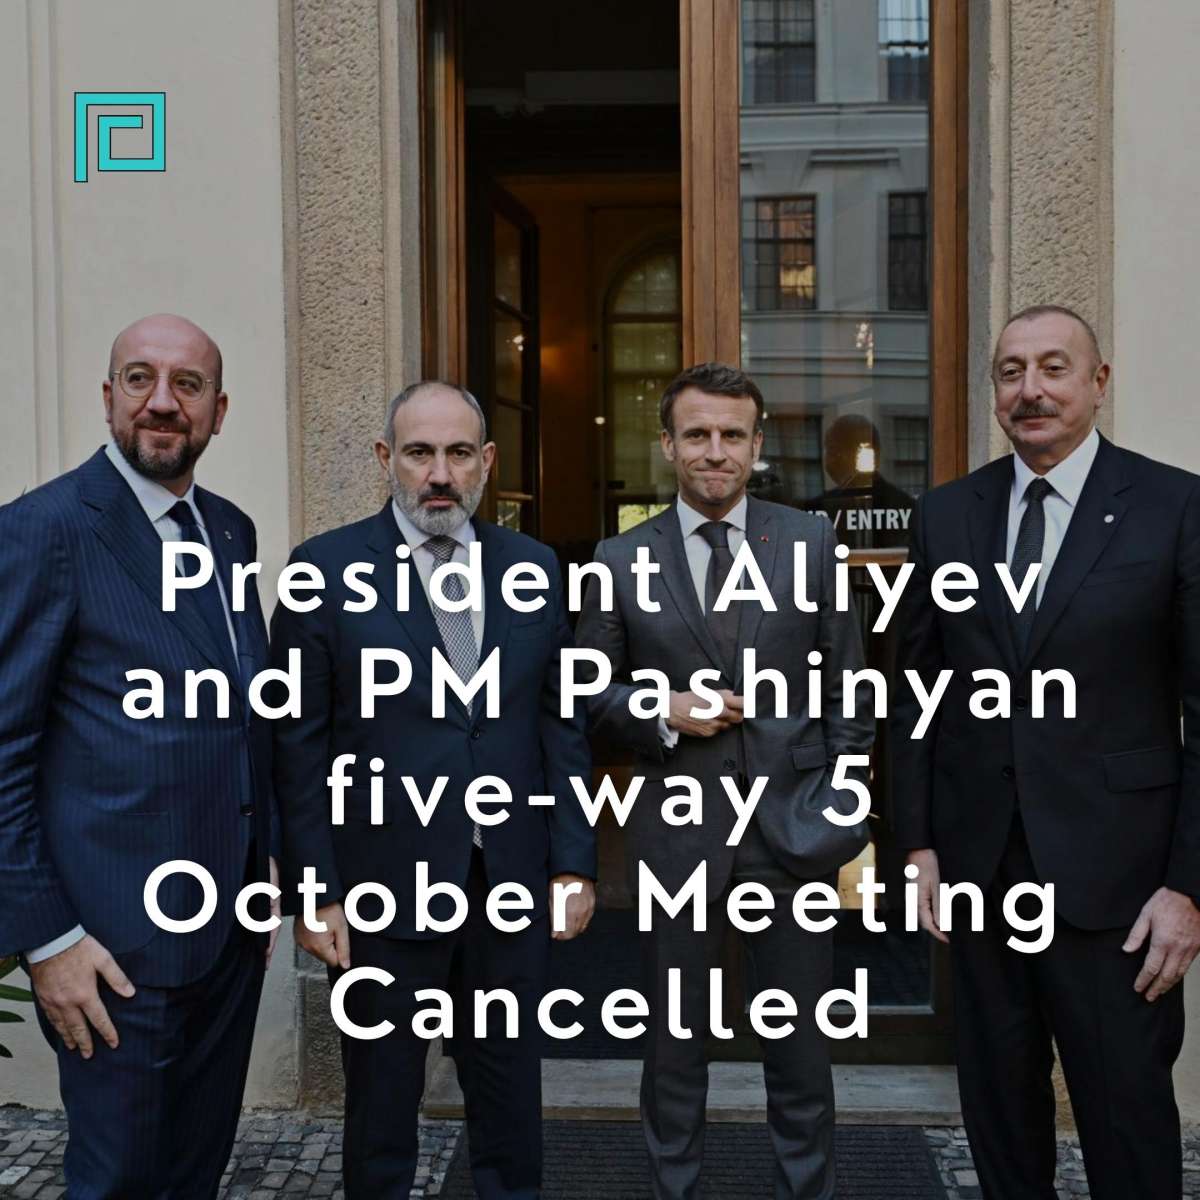 President Aliyev and PM Pashinyan five-way 5 October meeting cancelled